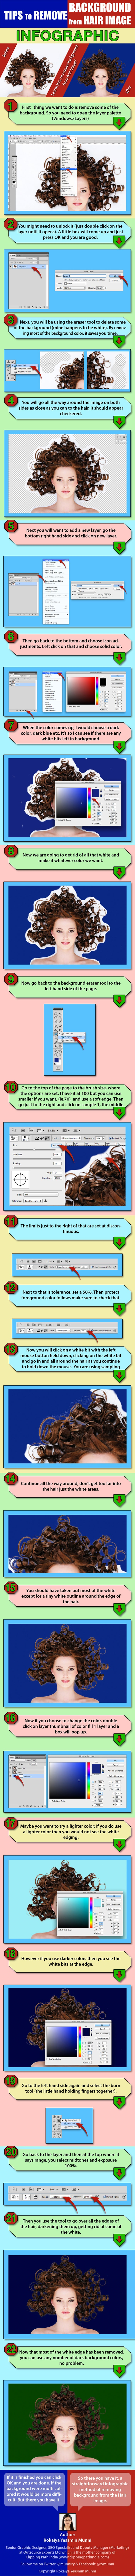 Infographic-of-background-removal-tutorial.jpg